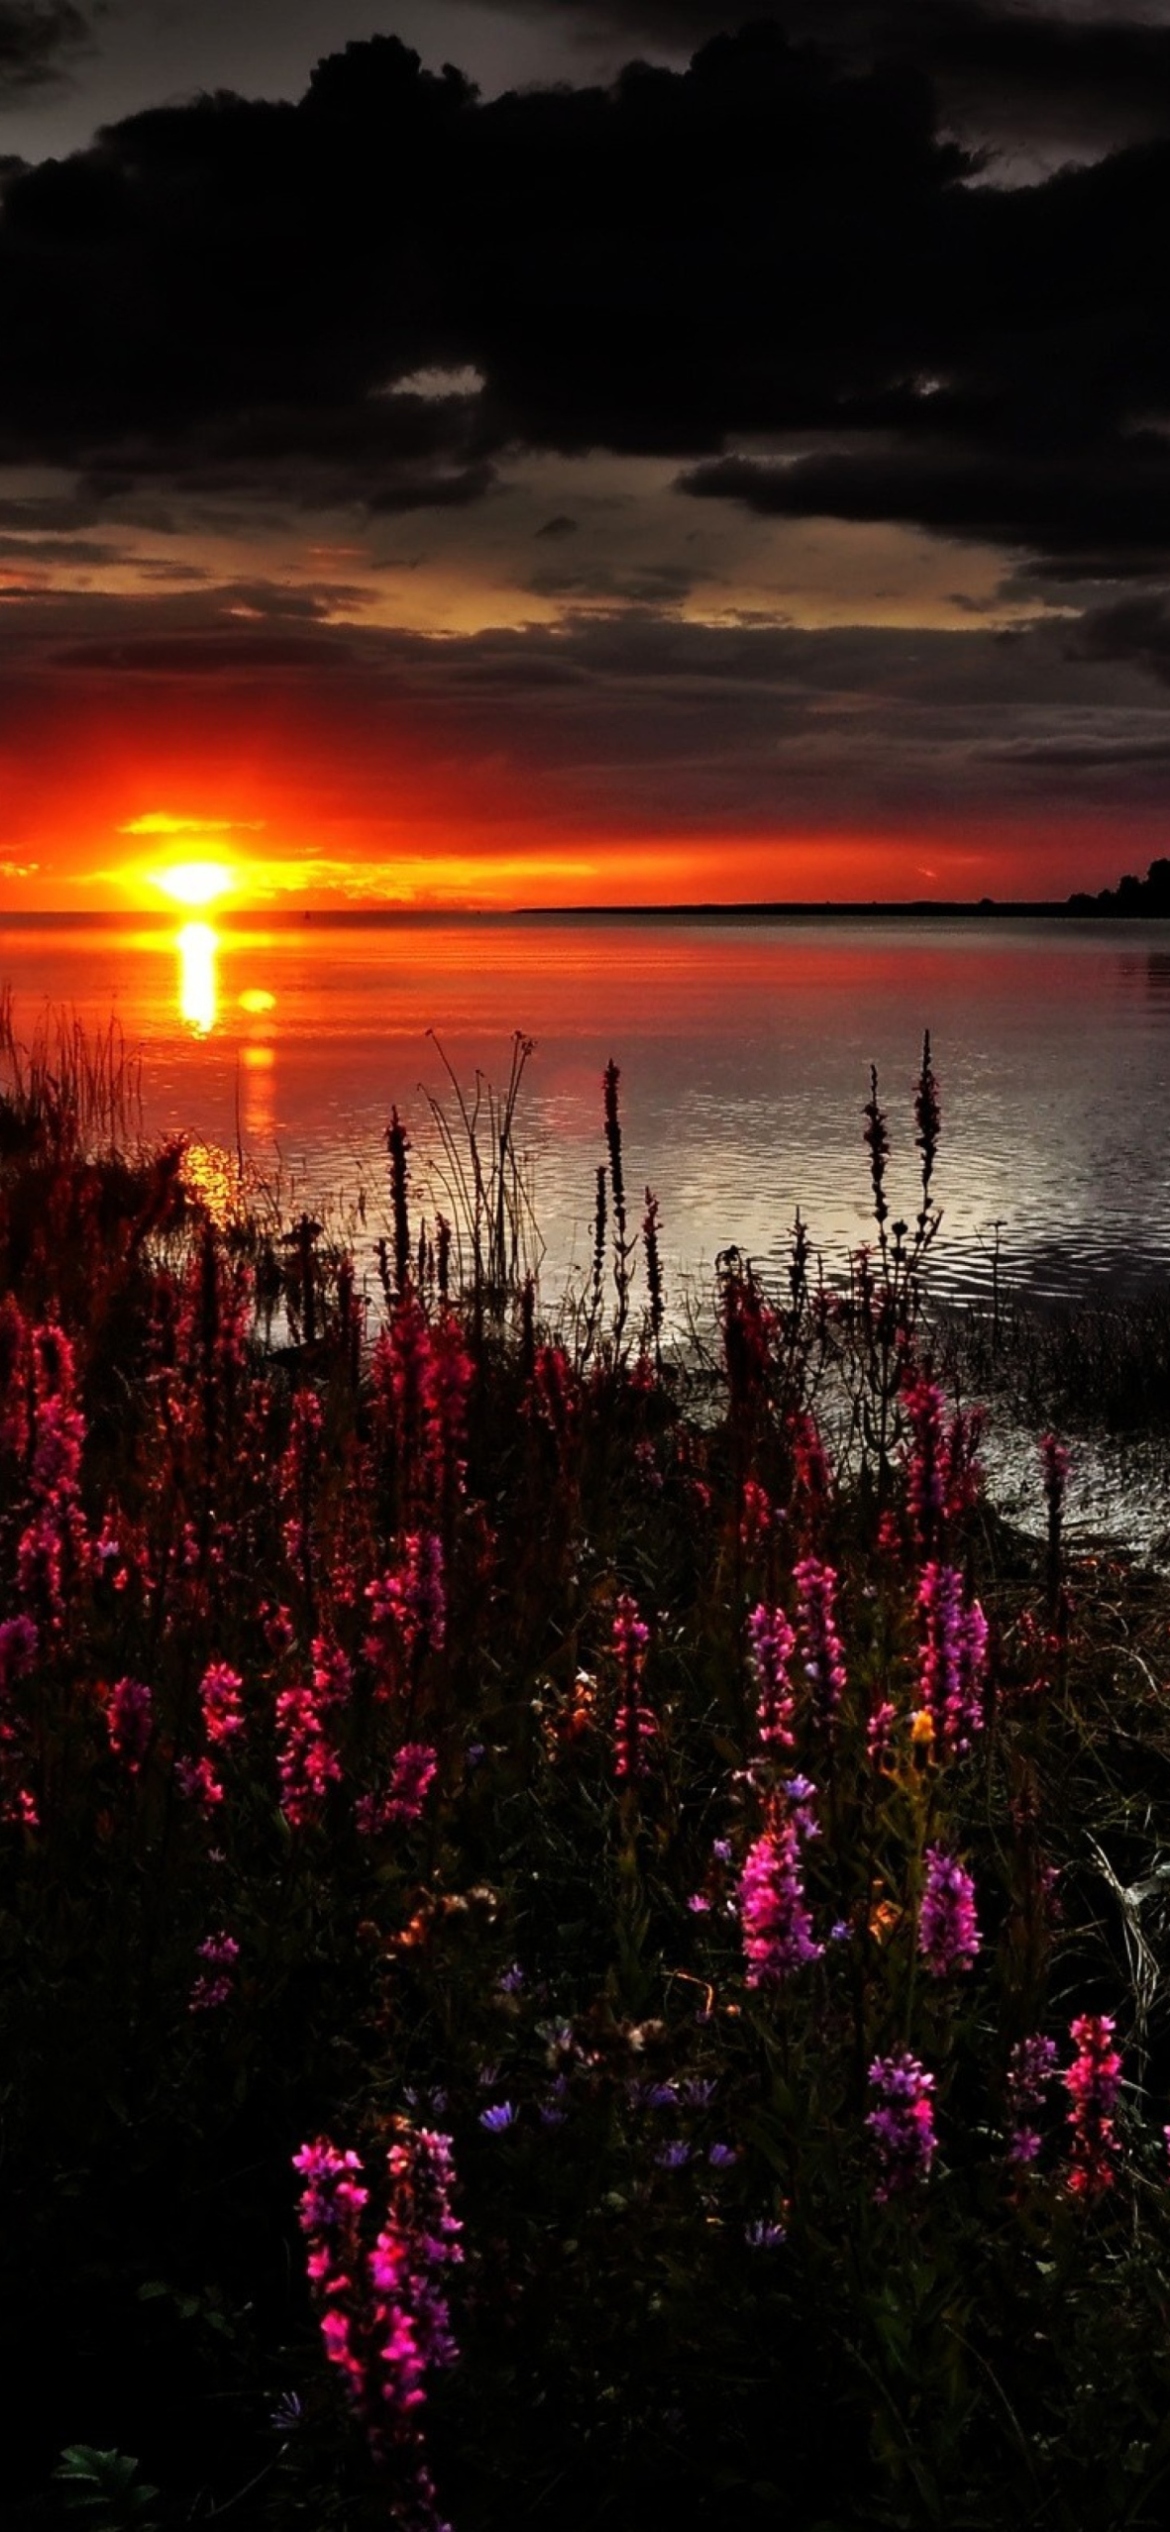 Flowers And Lake At Sunset wallpaper 1170x2532